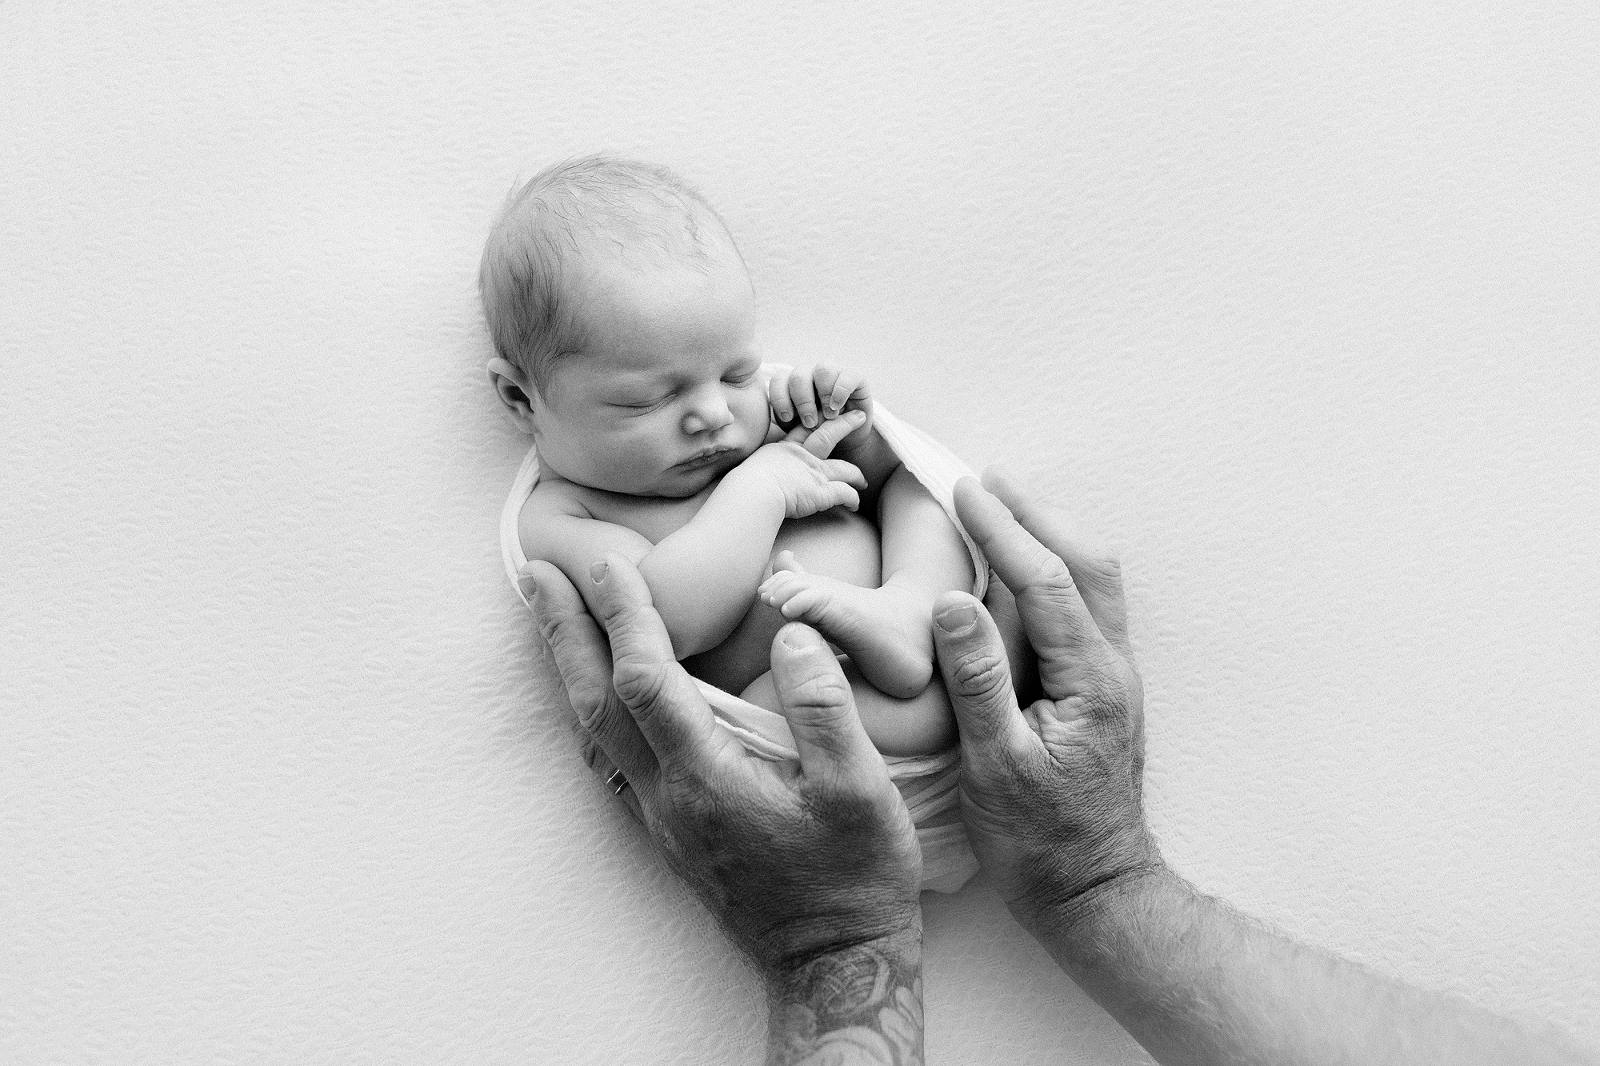 baby on a blanket with dad's hands